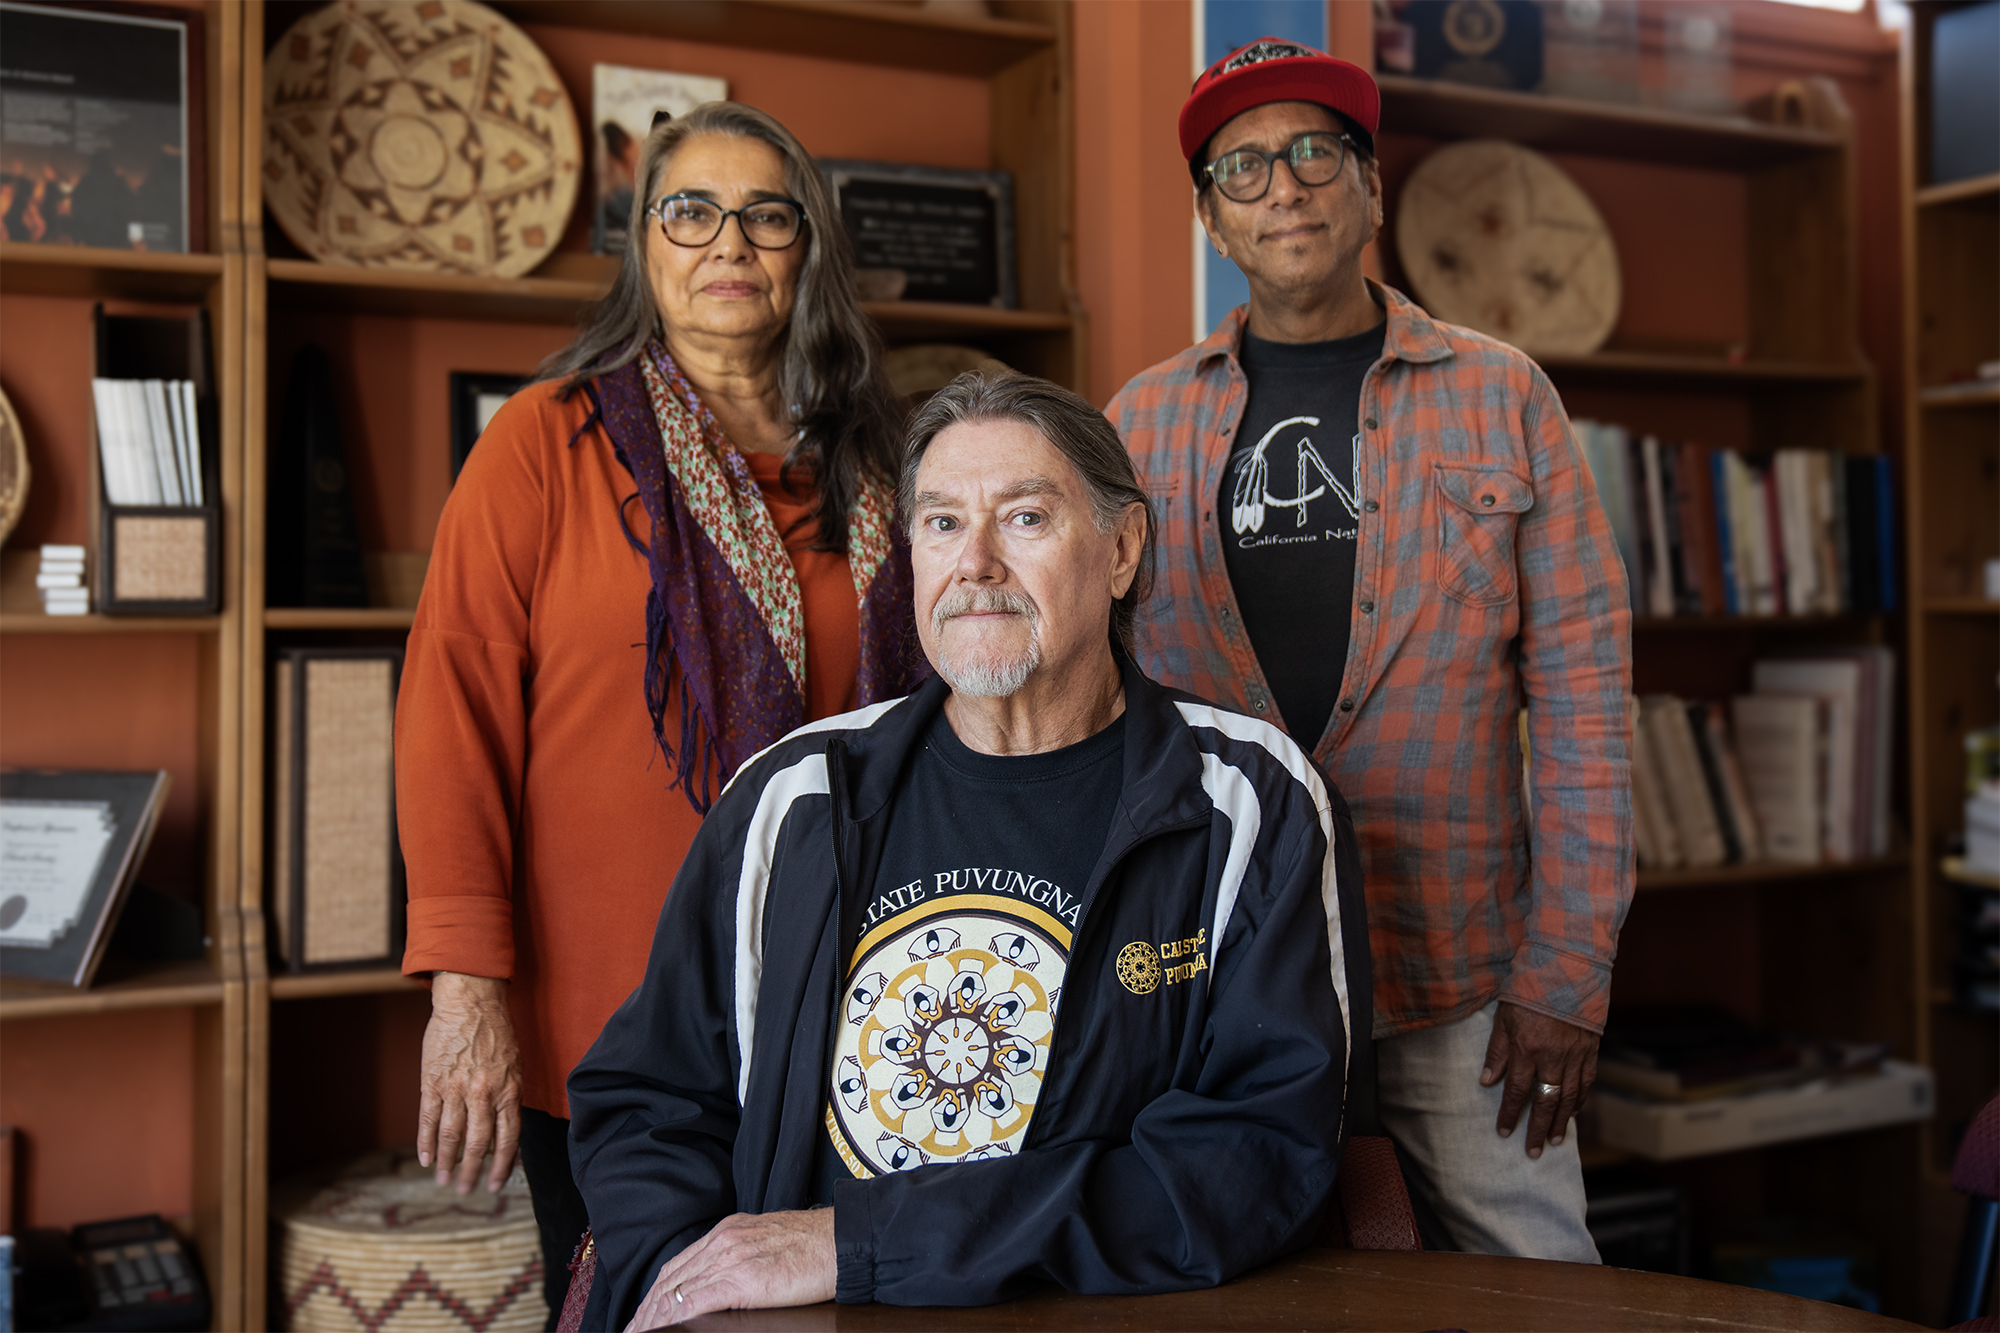 A photo of three individuals are pictured: two men and one woman. All have serious faces as they stand in front of a wall full of bookshelves that have various Native American artifacts and books on it.